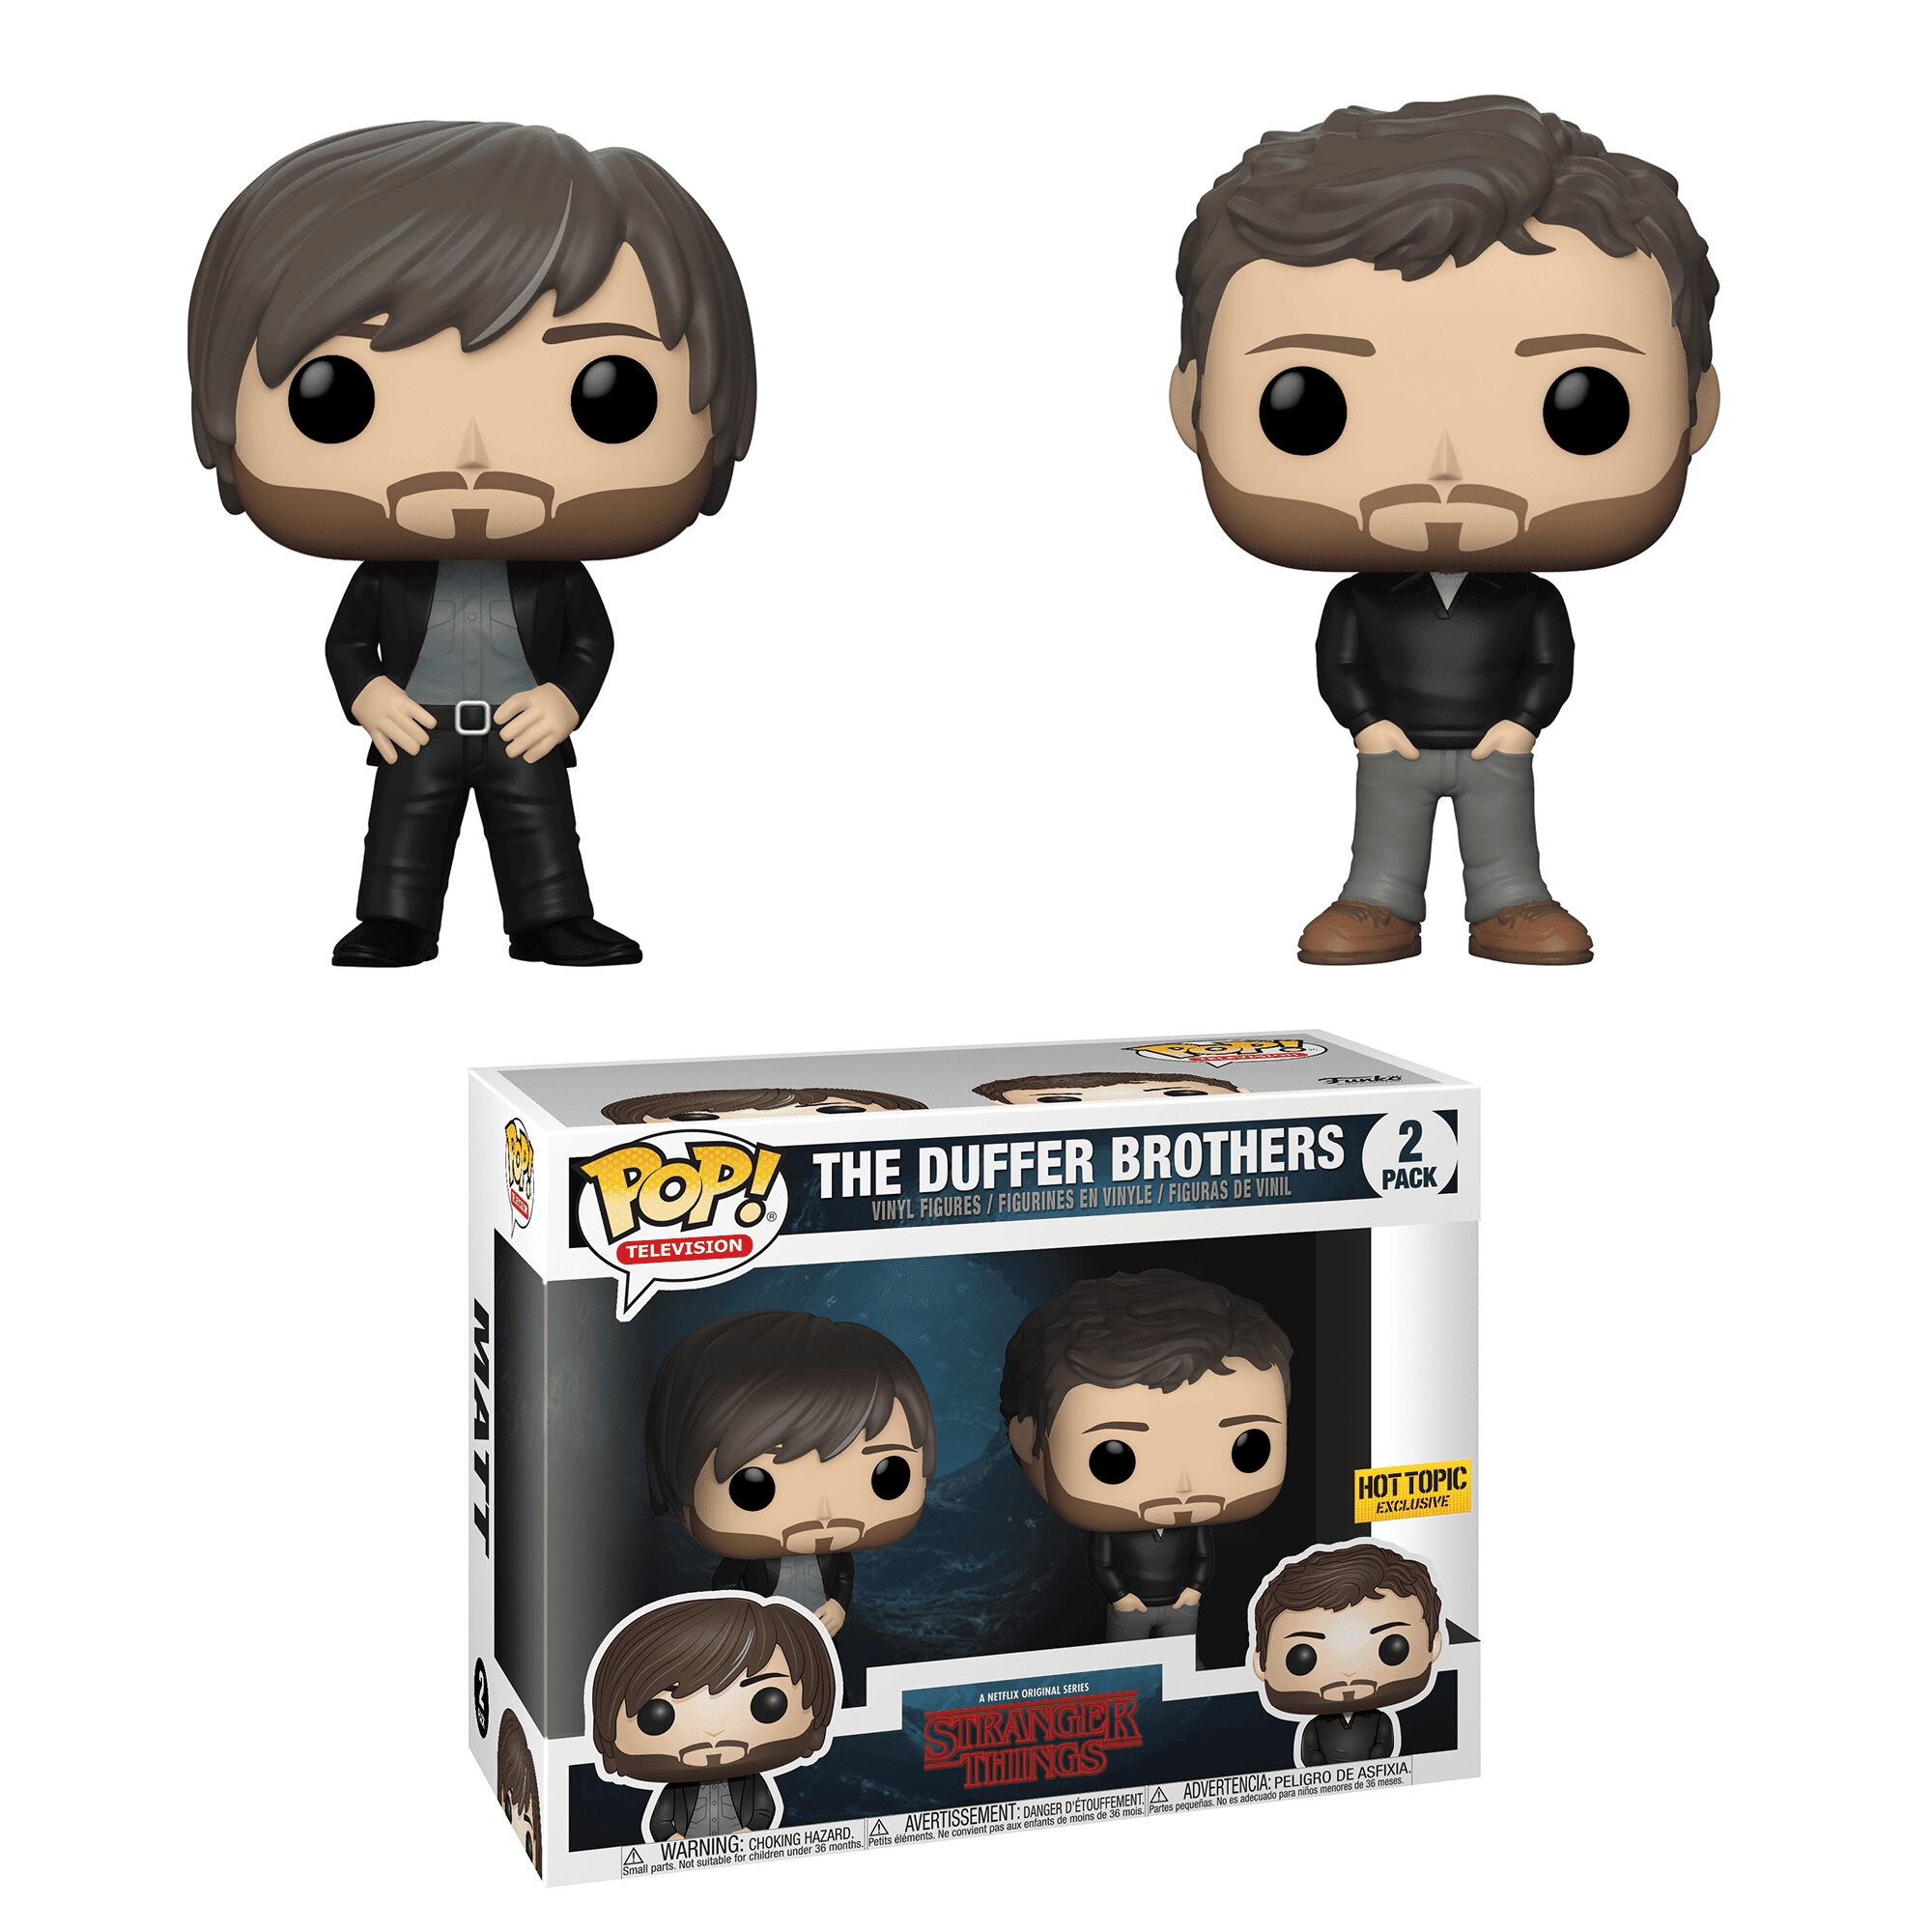 Coming Soon: Hot Topic Exclusive The Duffer Brothers Pop! 2-Pack!